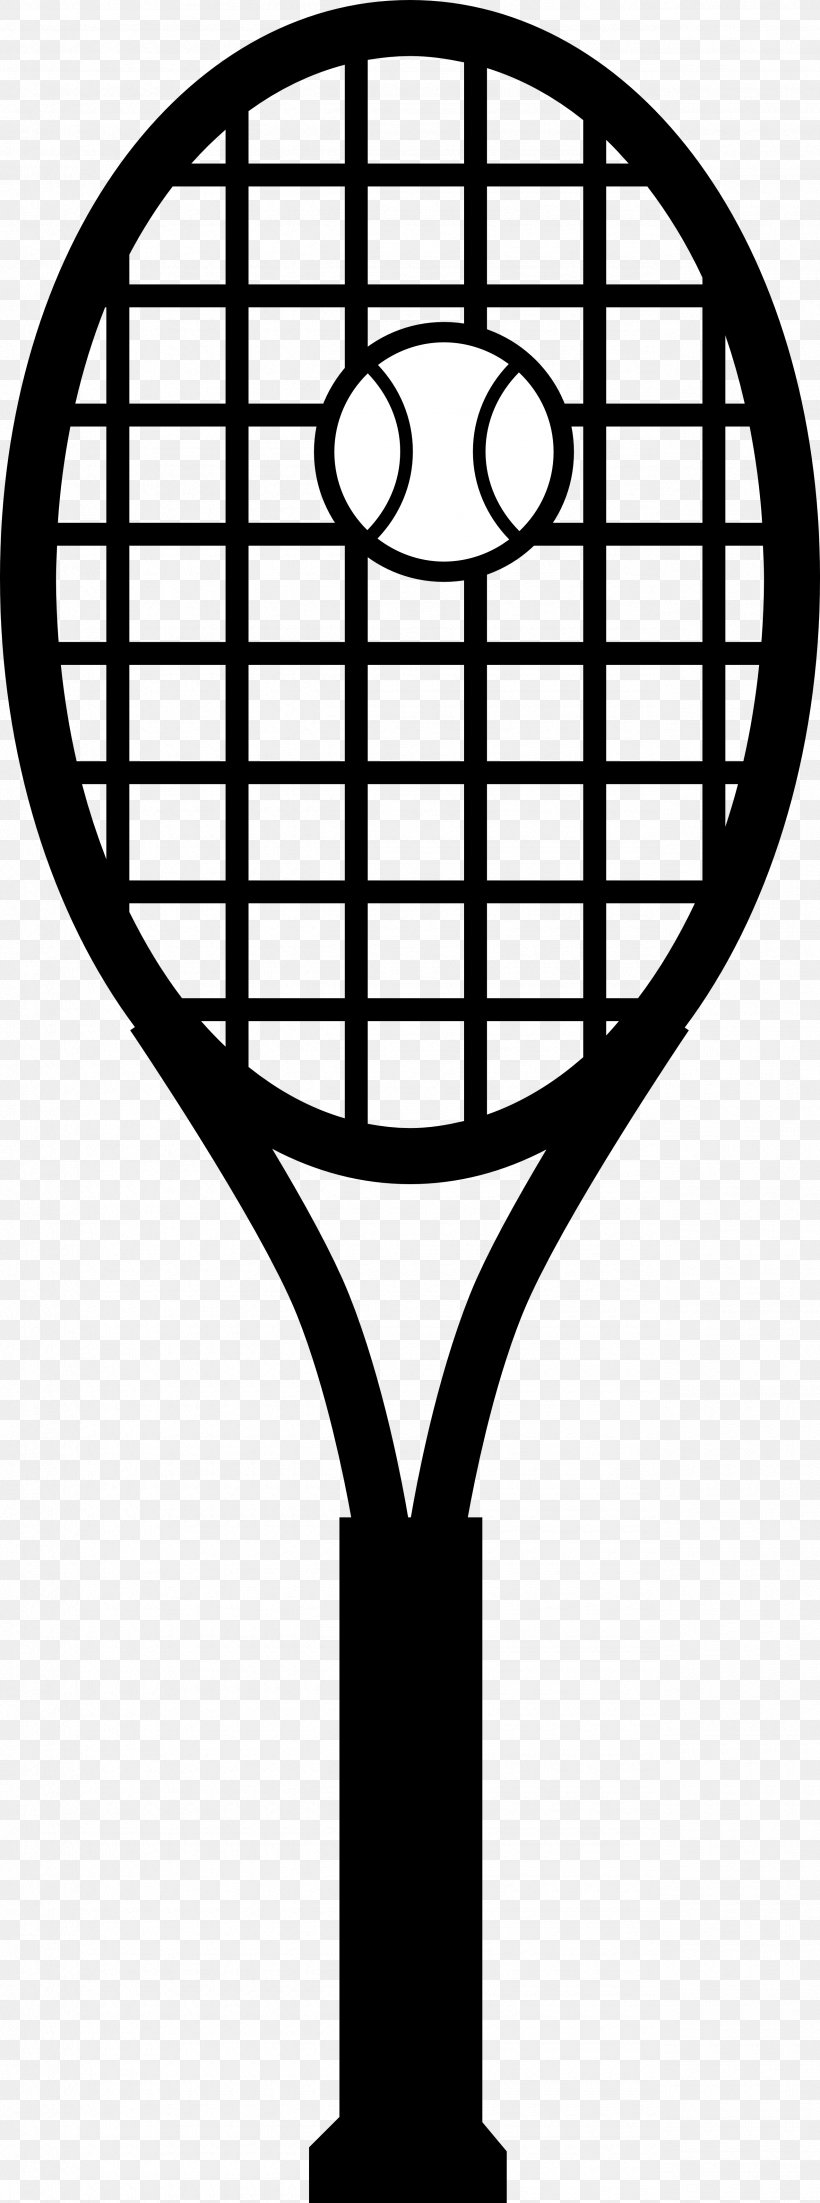 Racket Tennis Ball Clip Art, PNG, 2555x6865px, Racket, Area, Ball, Ball Game, Black And White Download Free